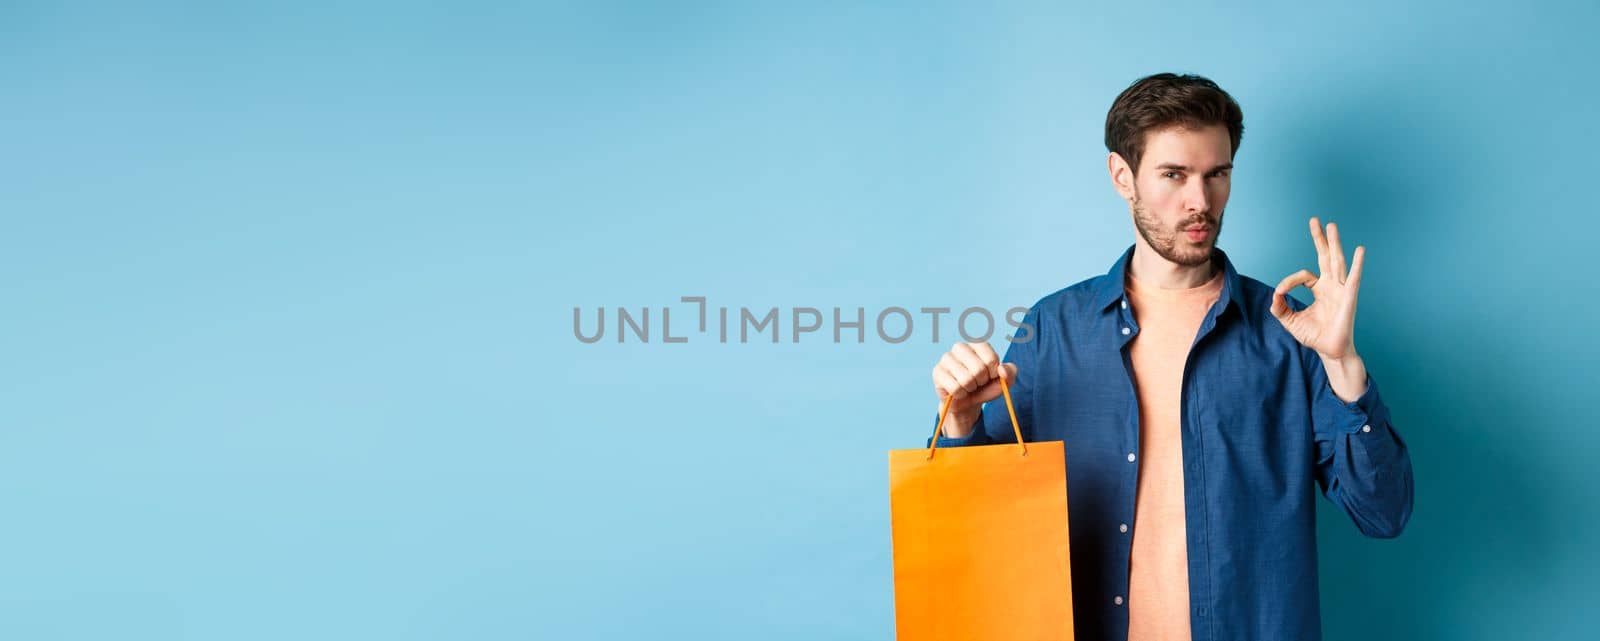 Handsome young man recommending store, showing orange shopping bag and OK sign, standing on blue background.